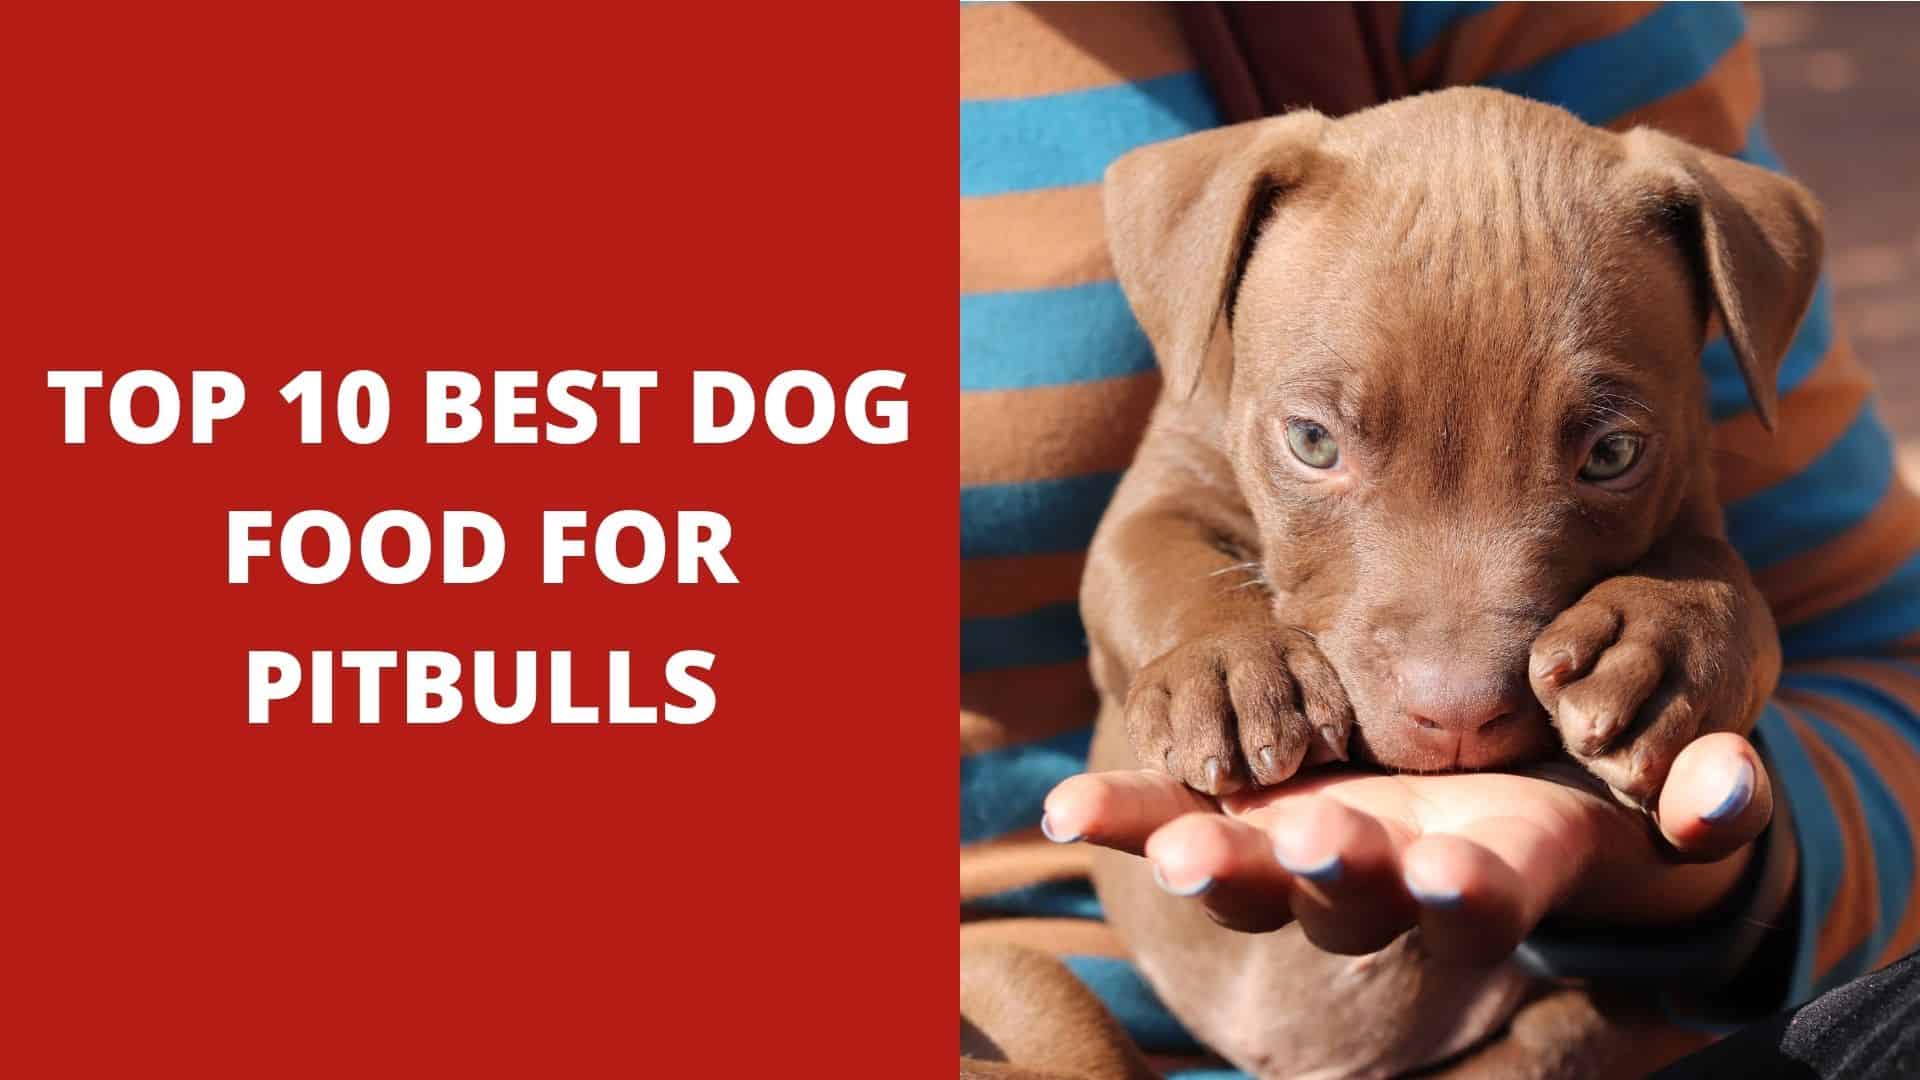 Top 10 Best Dog Food for Pitbulls – 2022 Reviews